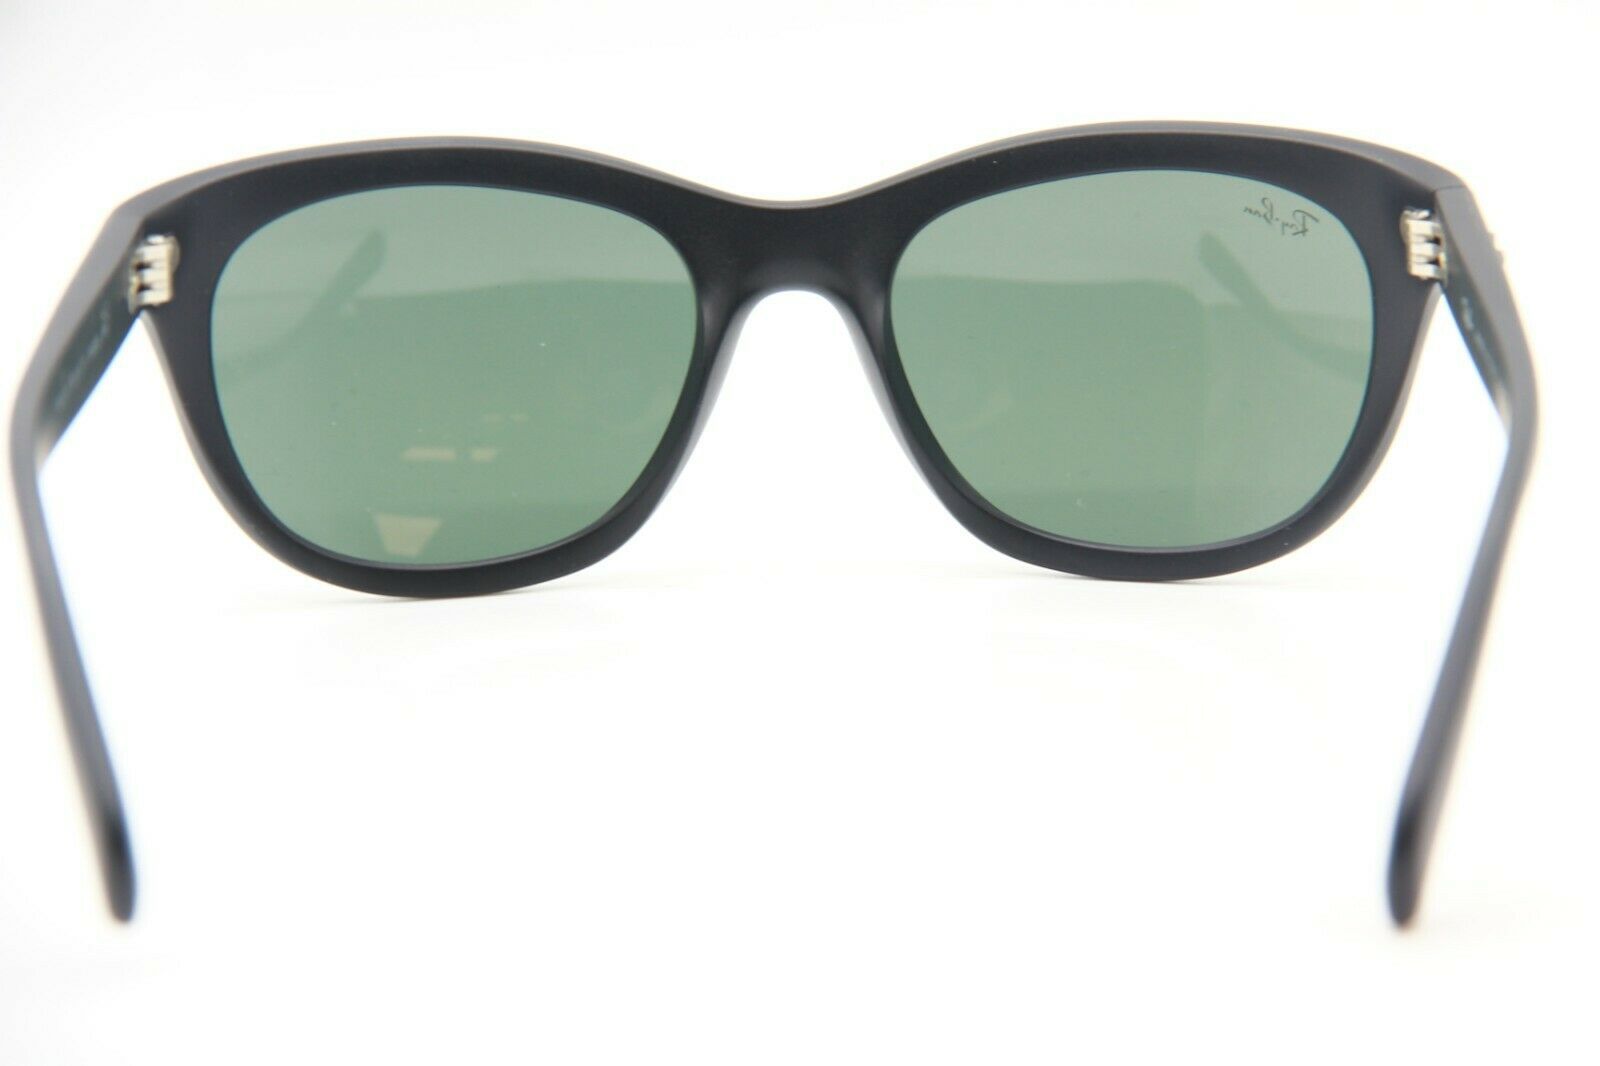 RAY-BAN RB 4216 601-S/71 BLACK AUTHENTIC FRAMES SUNGLASSES 56-20 ...